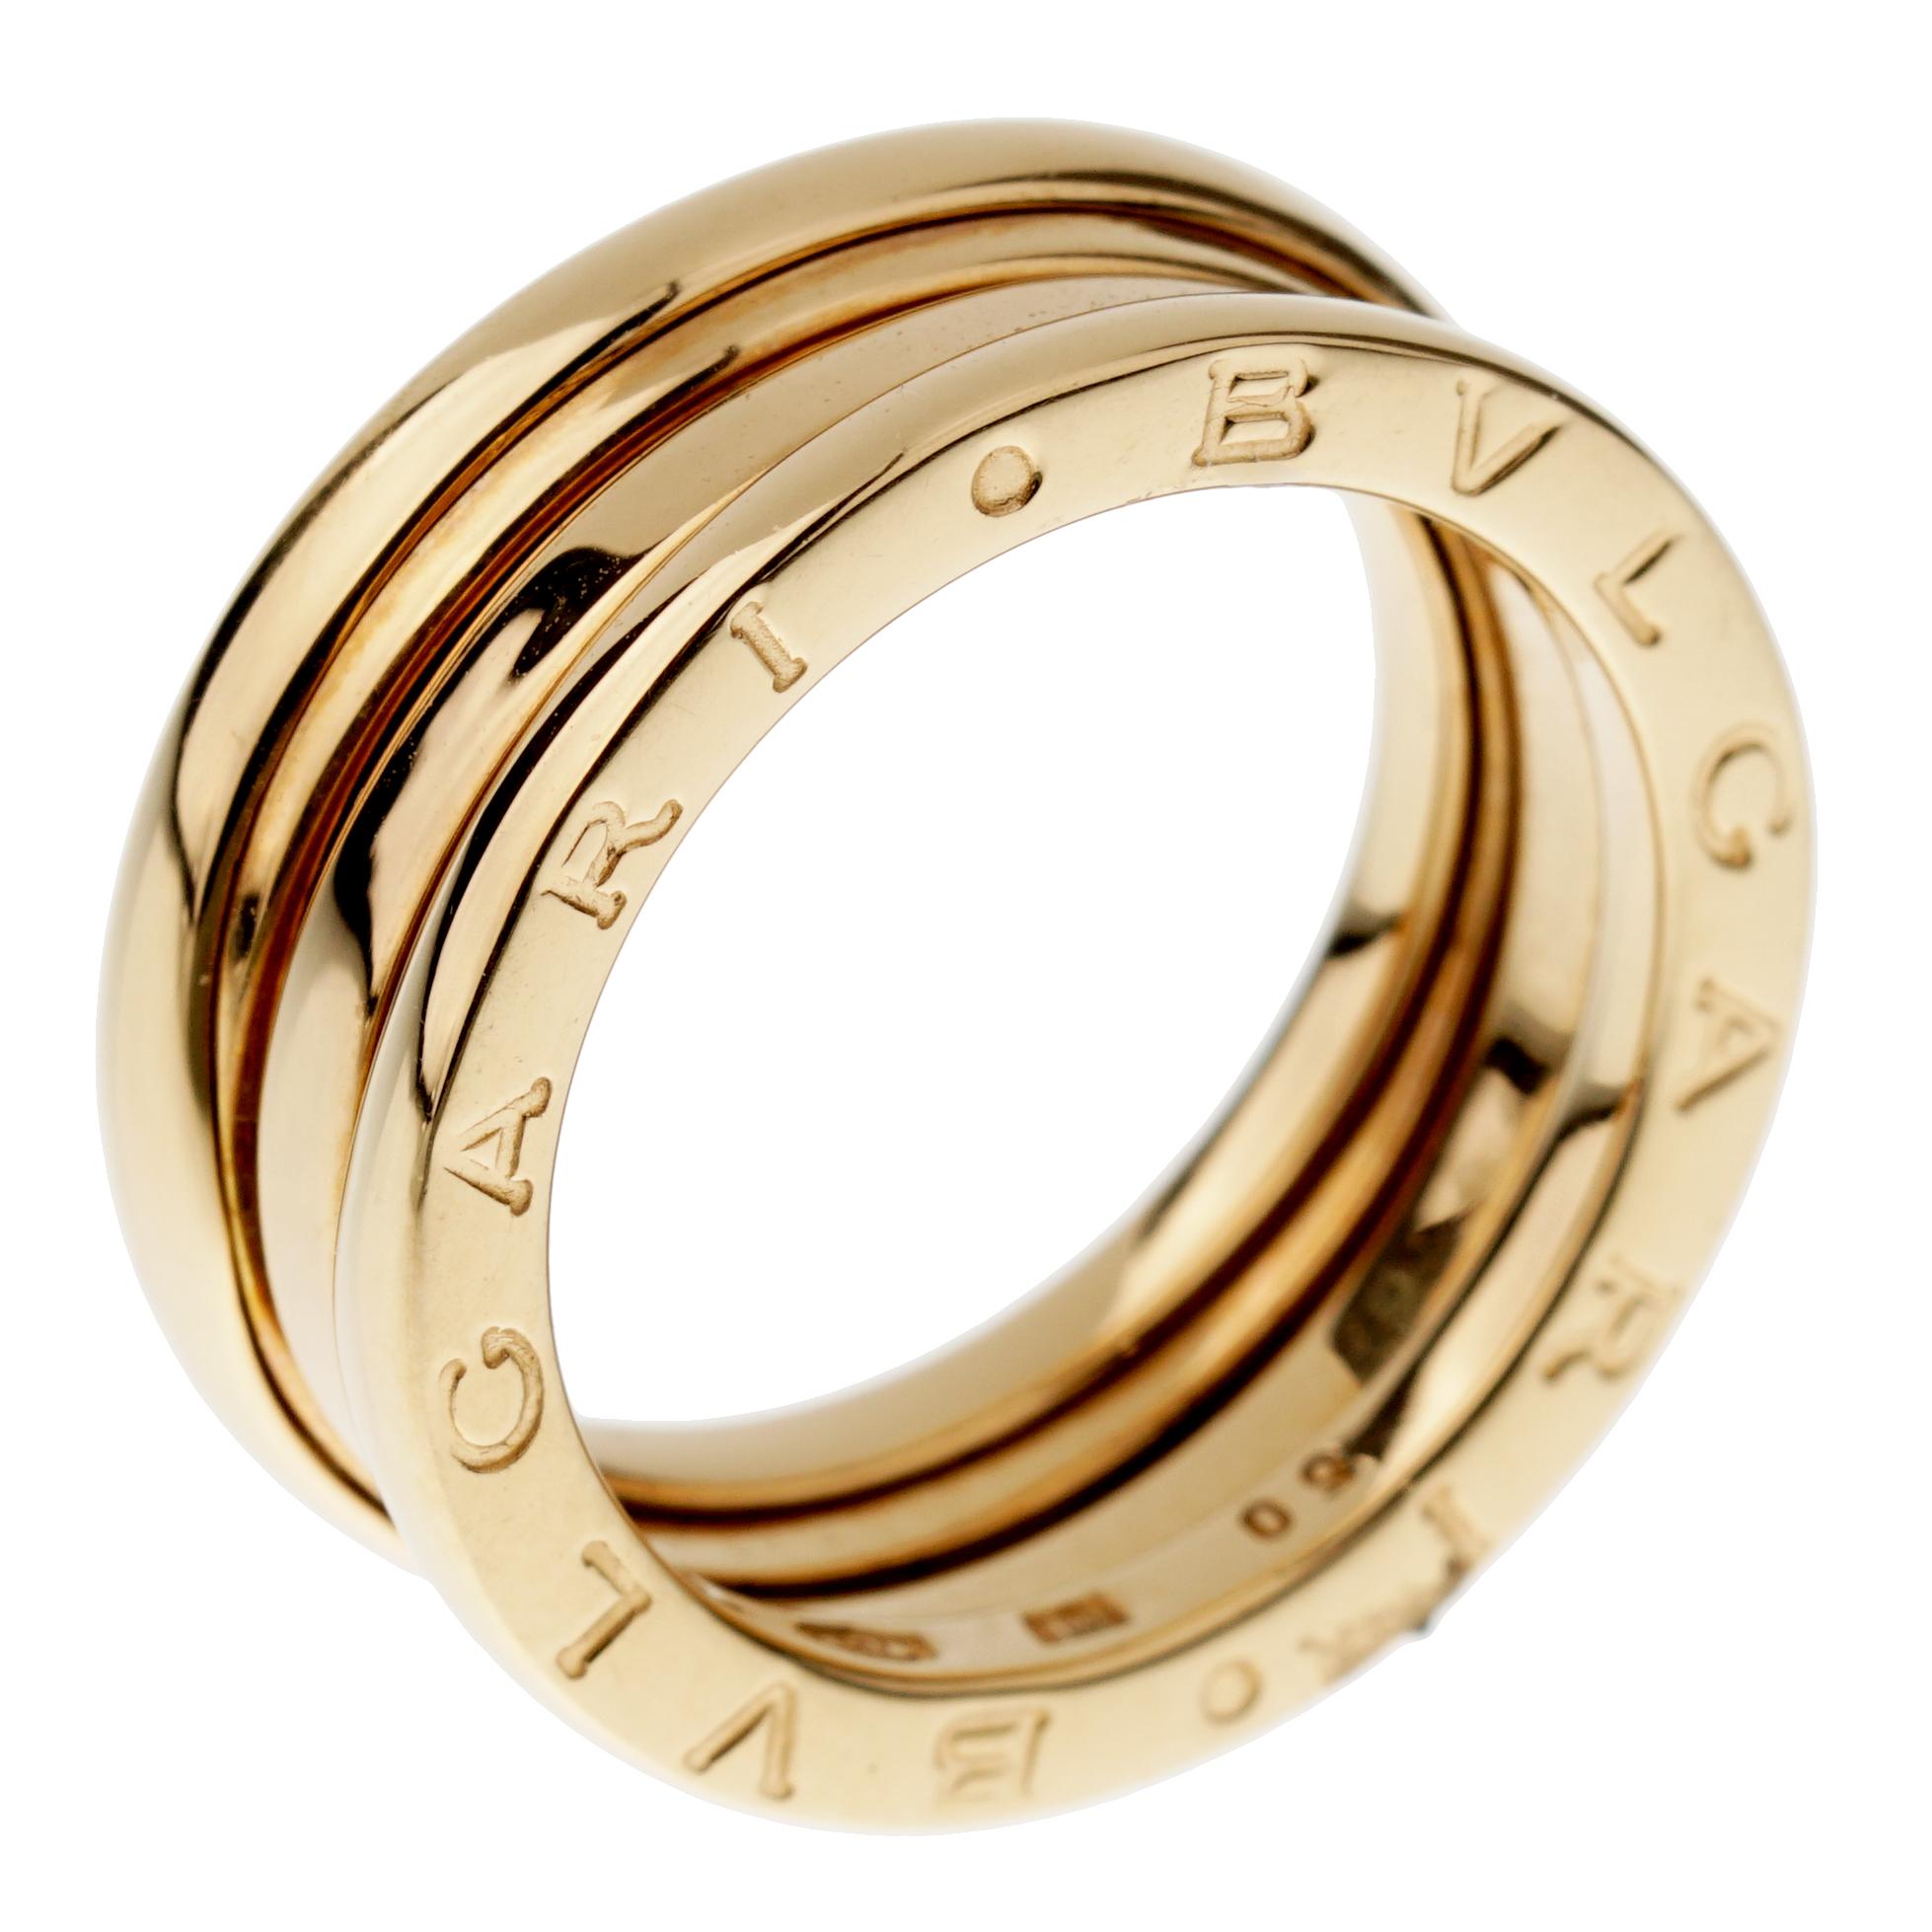 A fabulous staple to add to your Bvlgari collection from the Bzero1 collection showcasing strong bold lines in 18k yellow gold. The ring measures a size 5 and can not be resized.